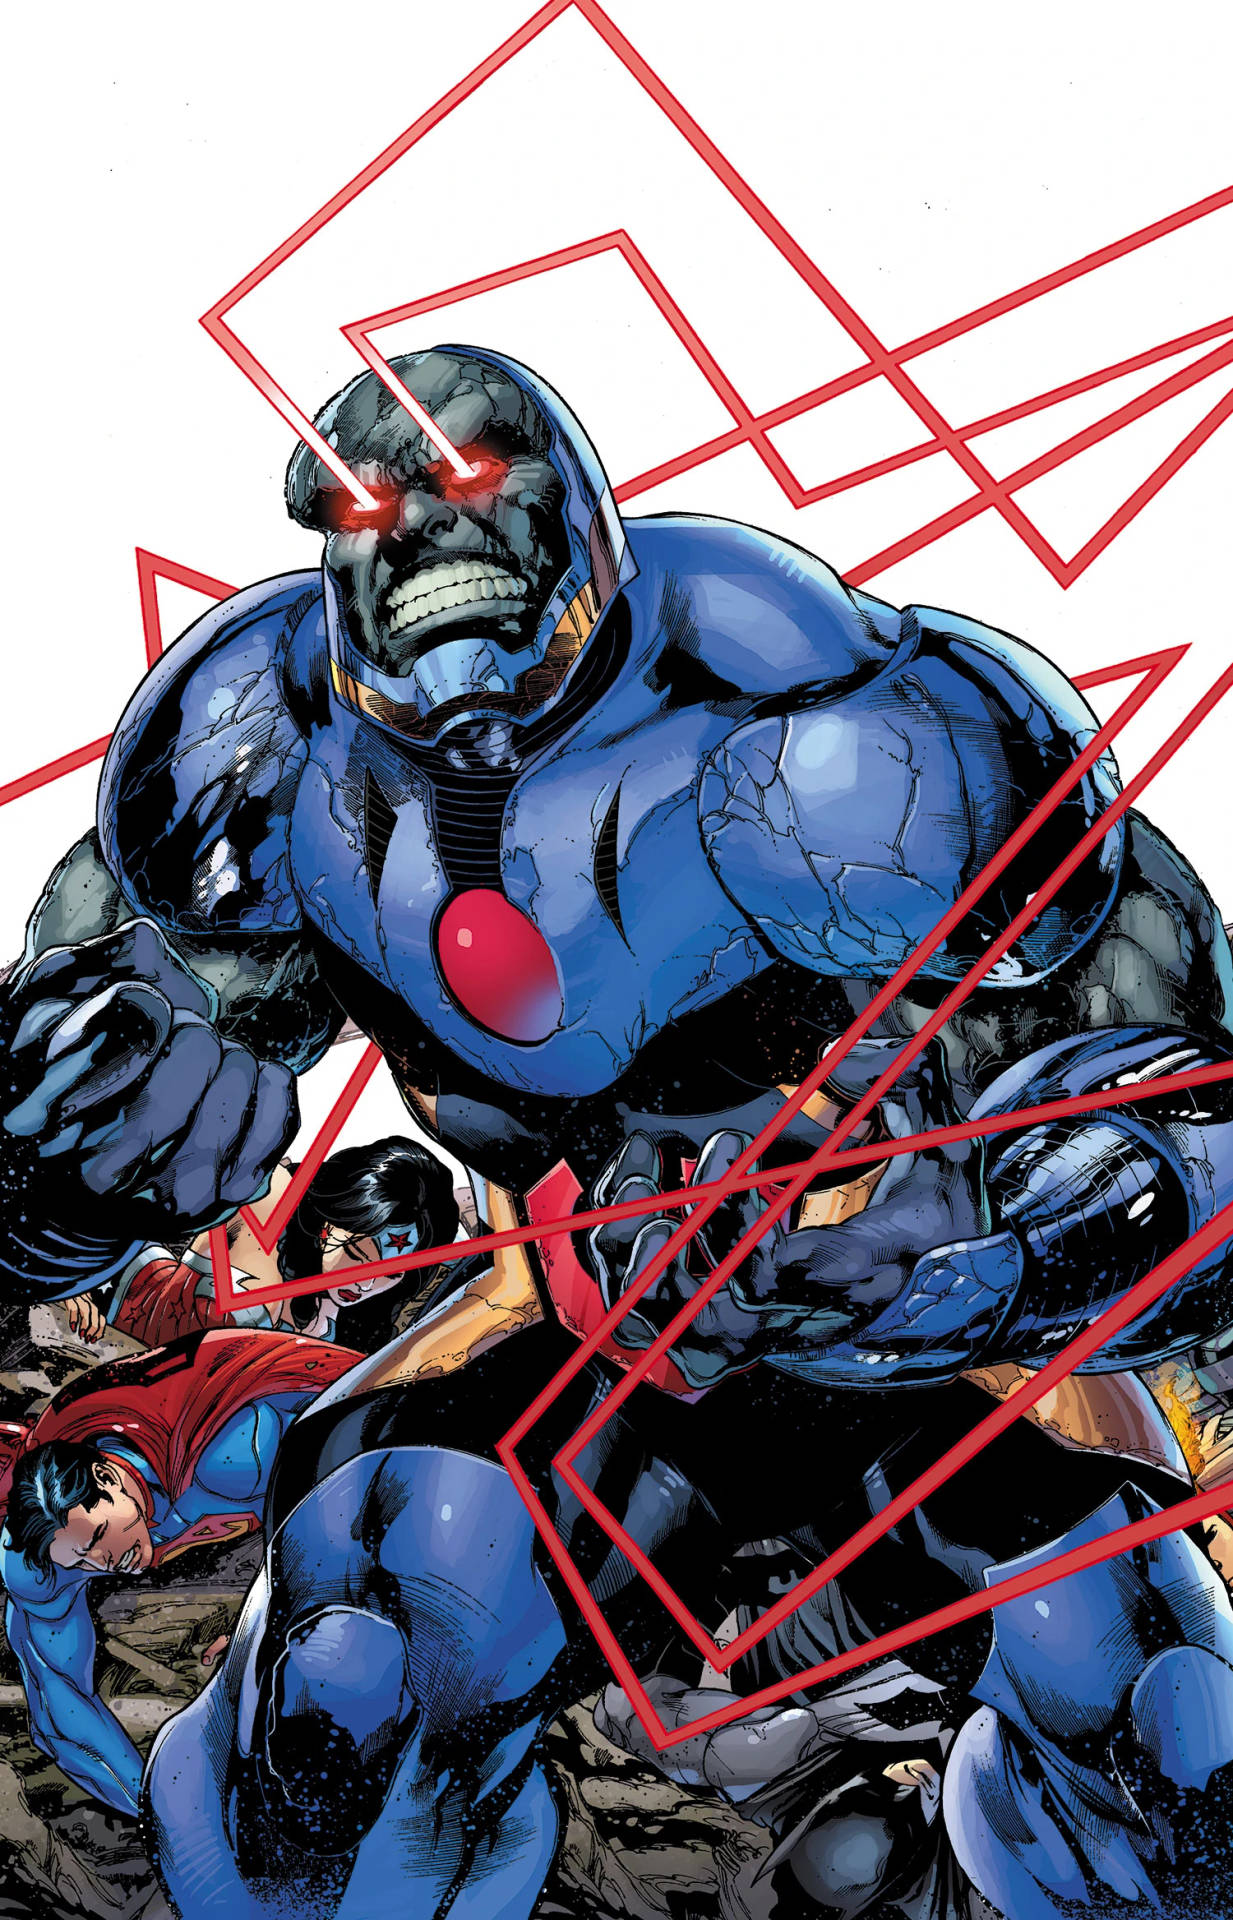 Darkseid Prevailing Over Defeated DC Superheroes Wallpaper